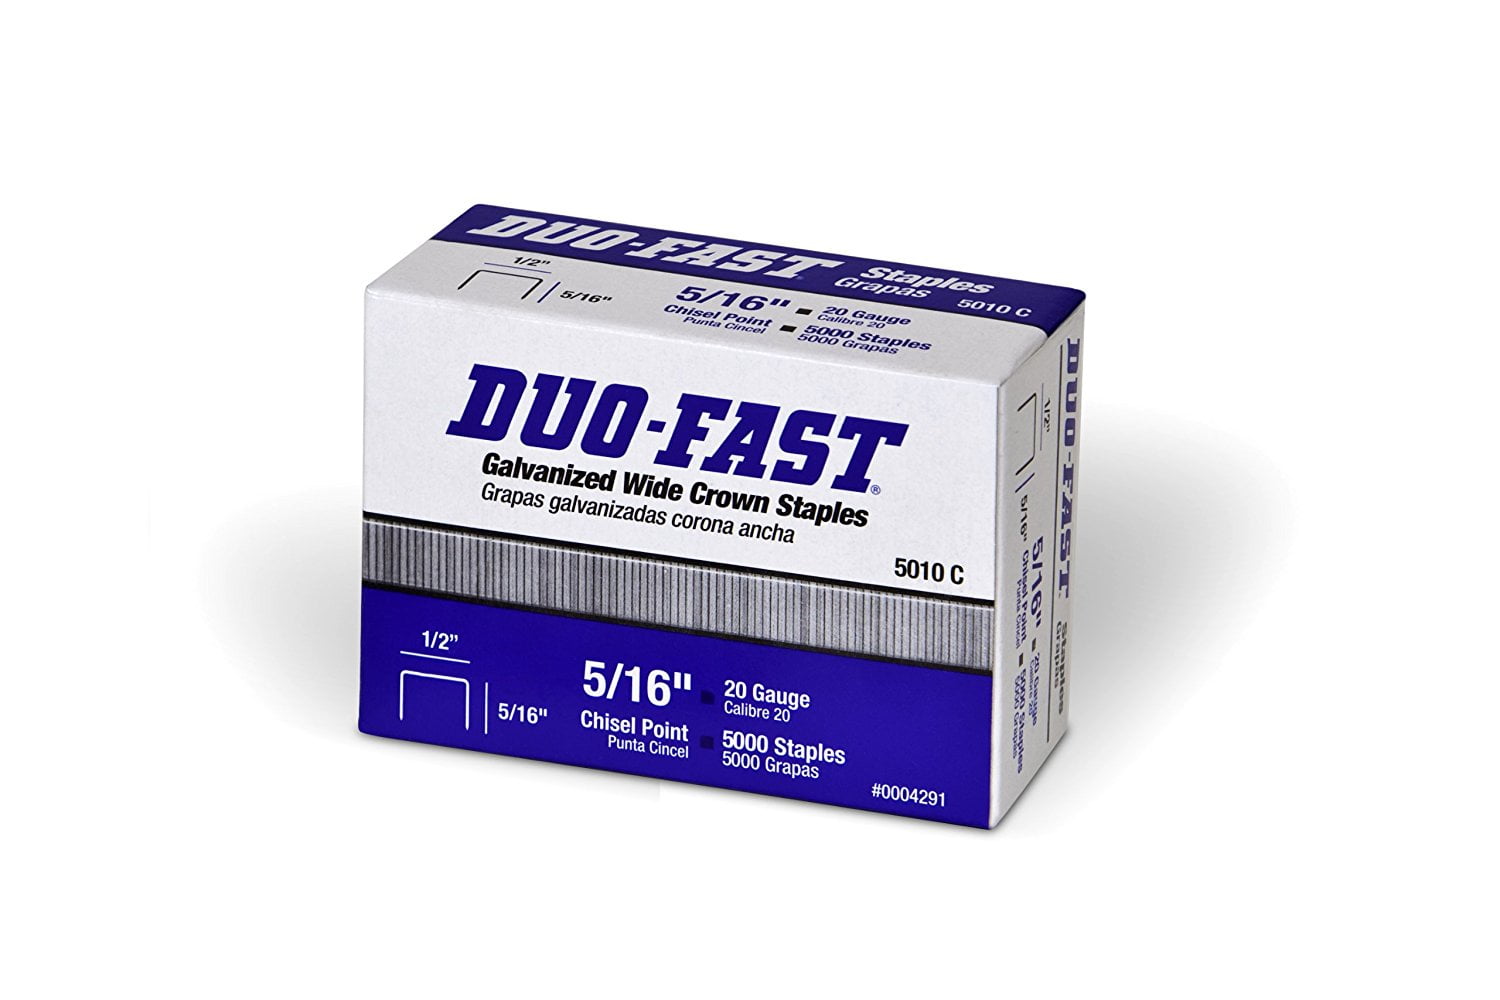 Duo-Fast  6424 CR 3/4" galv Staples DUOFAST 500 pieces 6 strips 